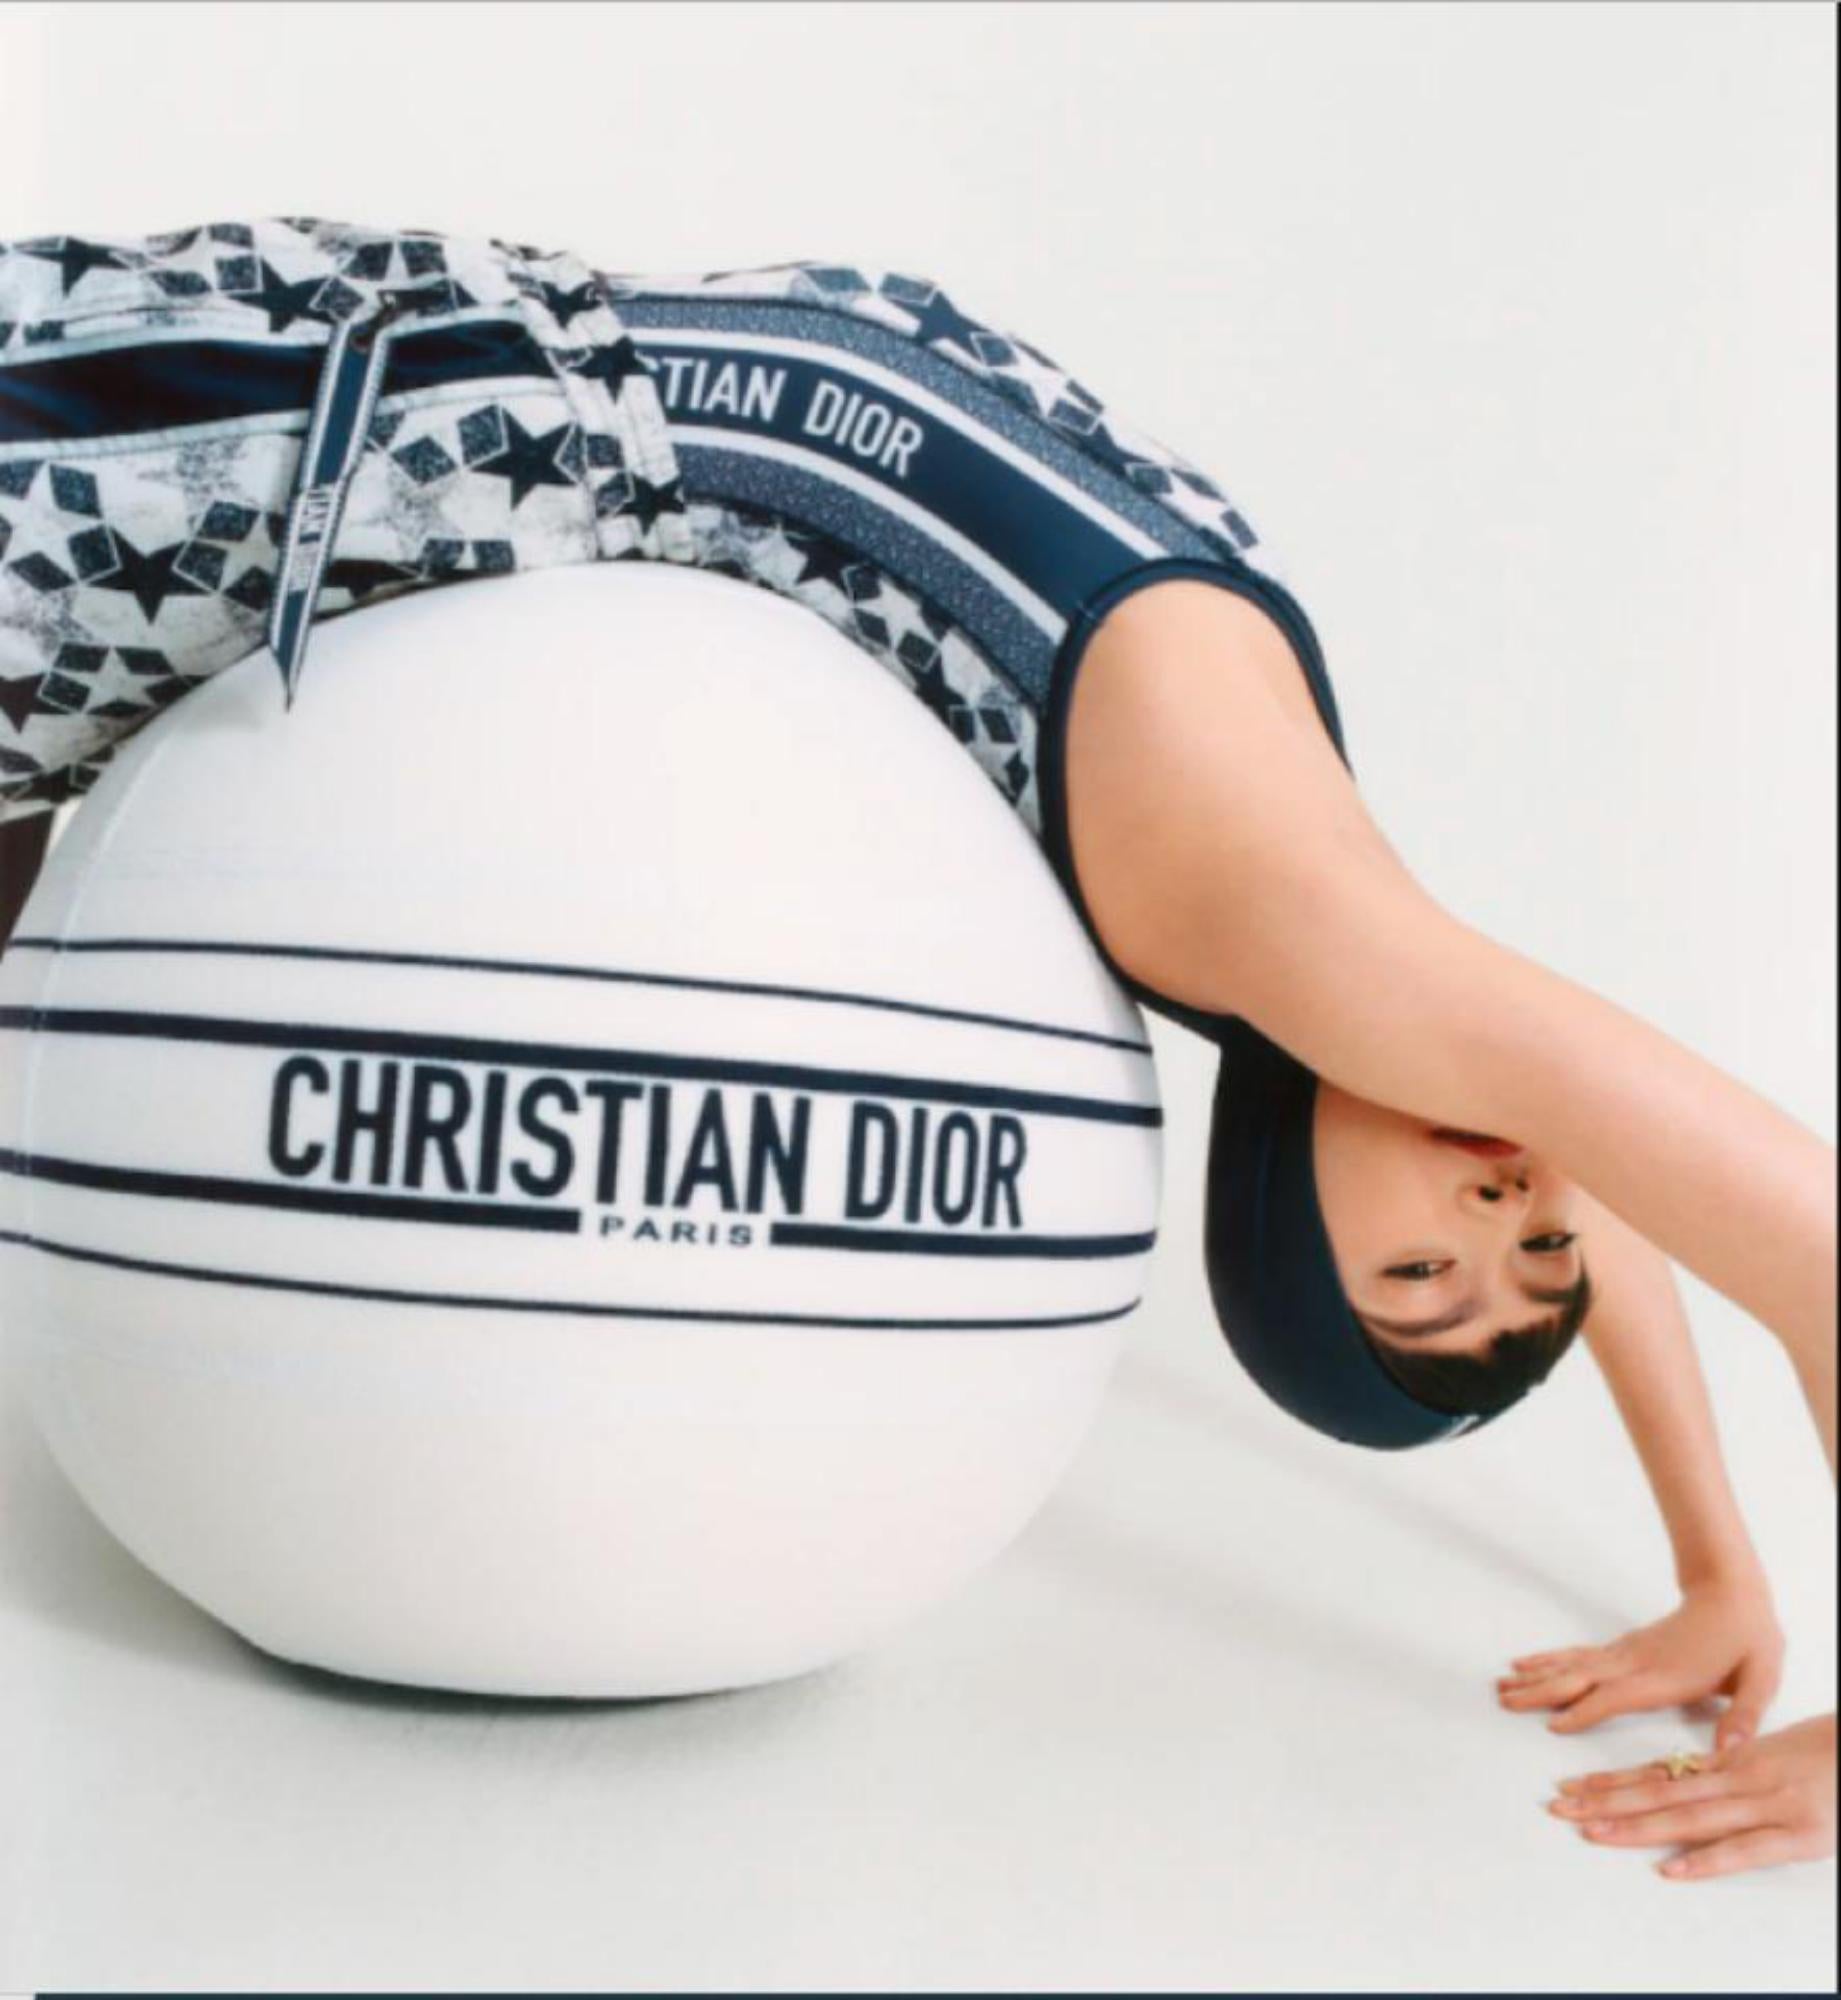 Dior Limited Edition White Logo Technogym Gym Ball for Dior Yoga 1D129
BRAND NEW
(10/10 or N)

SIZE & FIT
Diameter: 55 cm / 21.5 inches
Weight limit: 140 kg / 308.5 pounds

Combining wellbeing and elegance, TECHNOGYM BALL FOR DIOR is offered in a